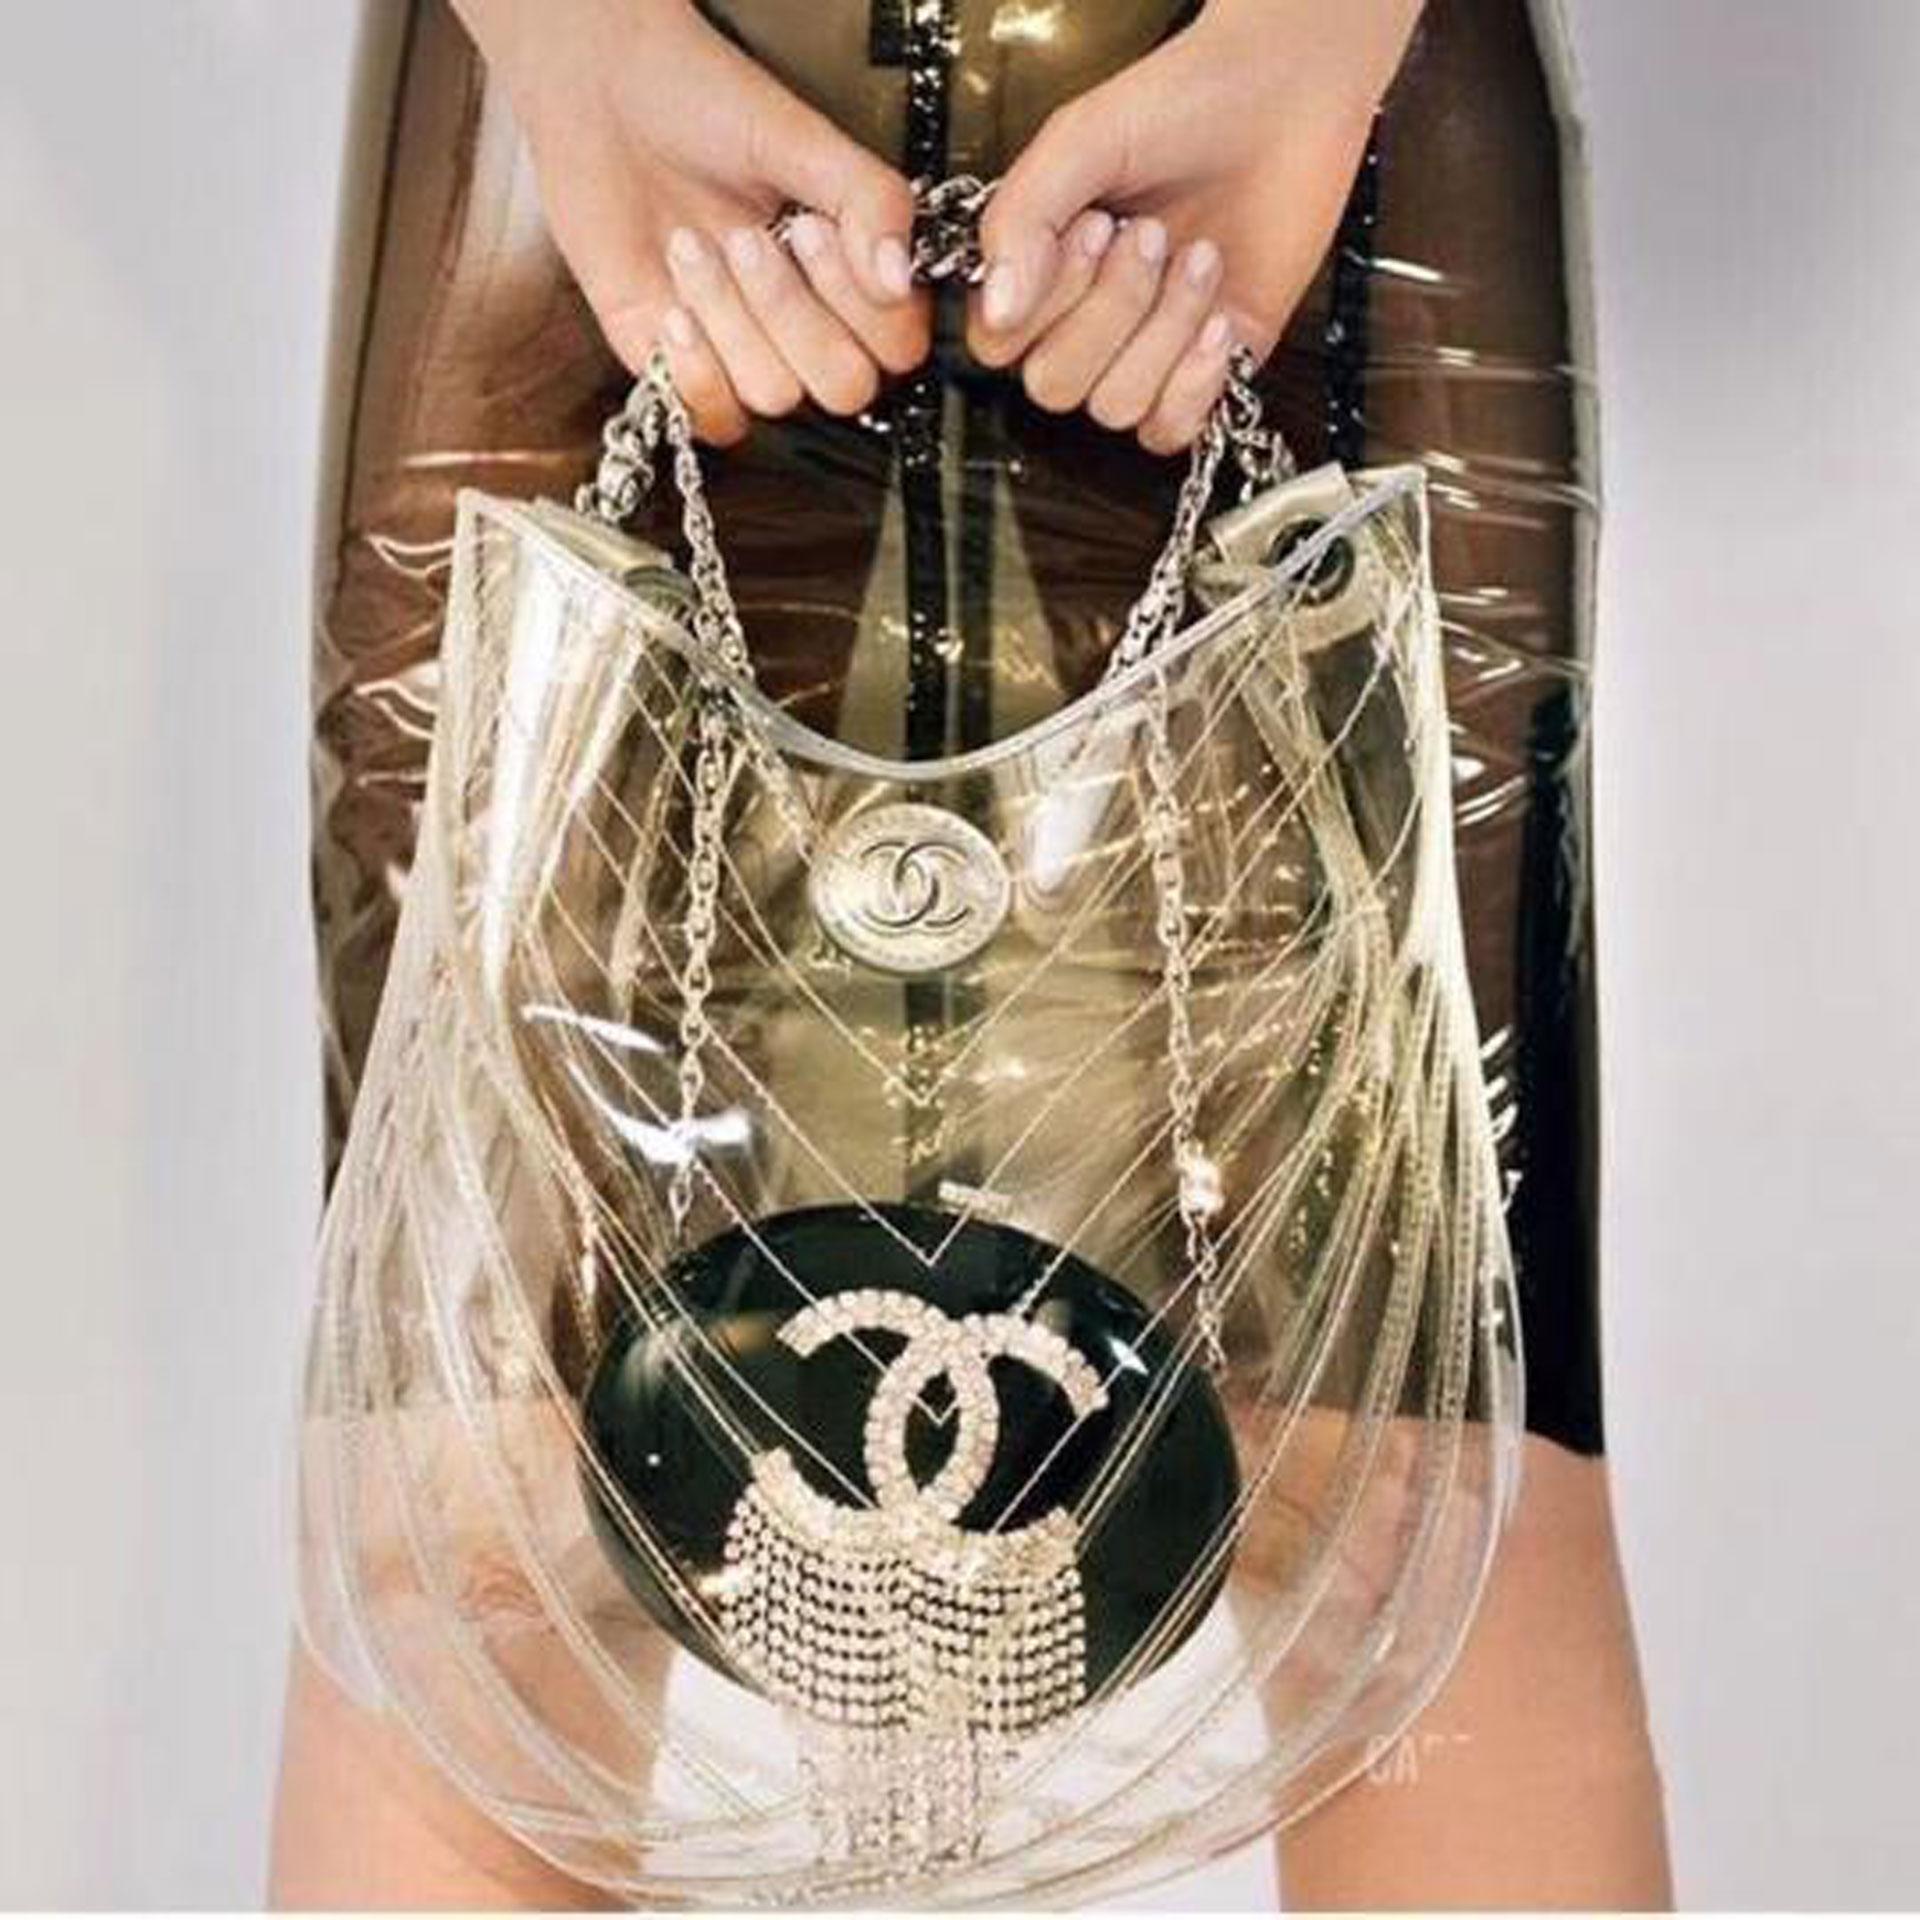 Chanel 2018 stunning runway teardrop hobo bag with silver and glazed calfskin leather

Limited edition transparent bag comes with box, dust bag, and authenticity card. 

Sold-out everywhere! 

Made in France.

